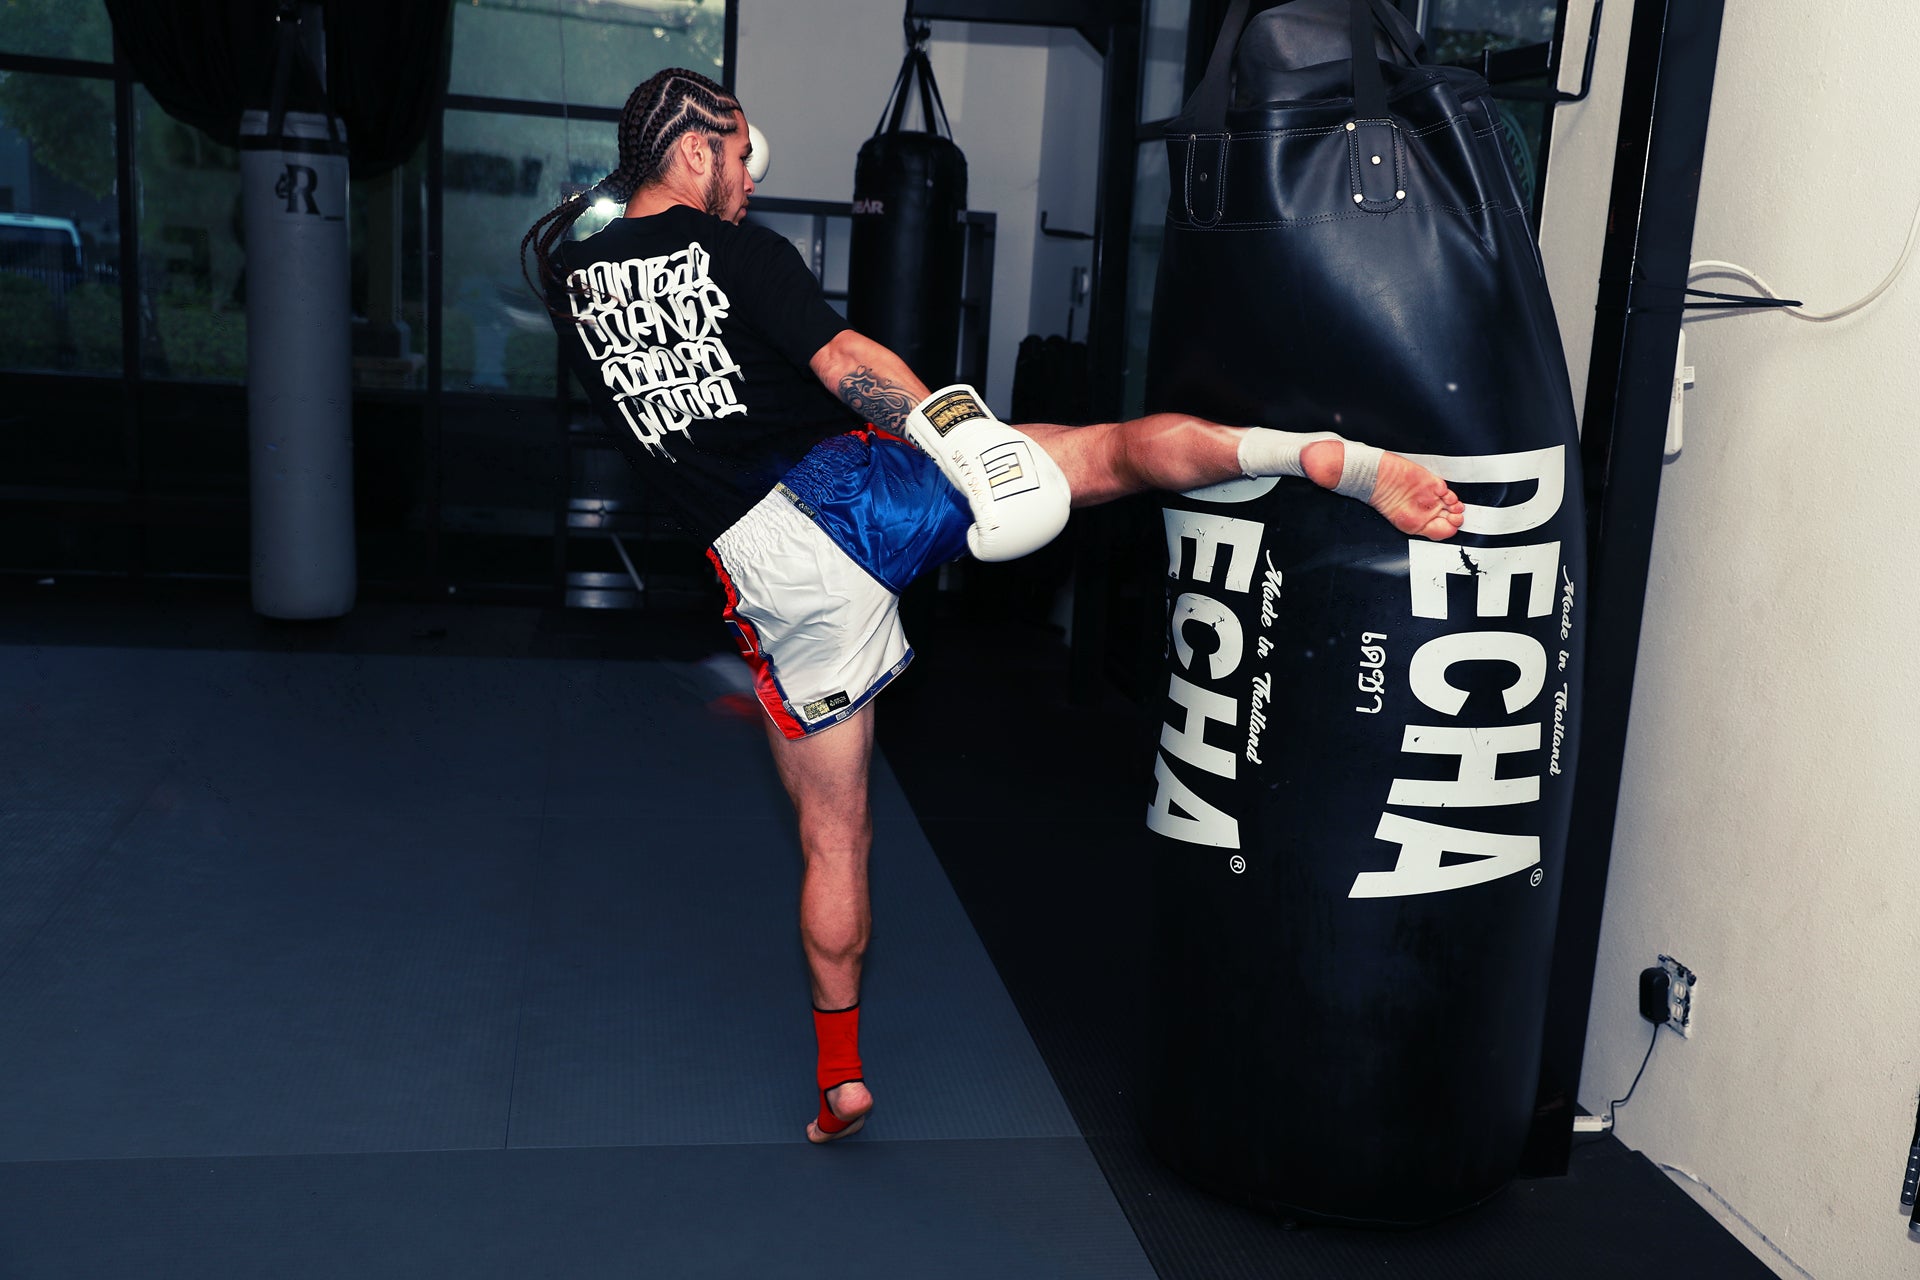 A photo of Eddie demonstrating a kick on the heavy bag